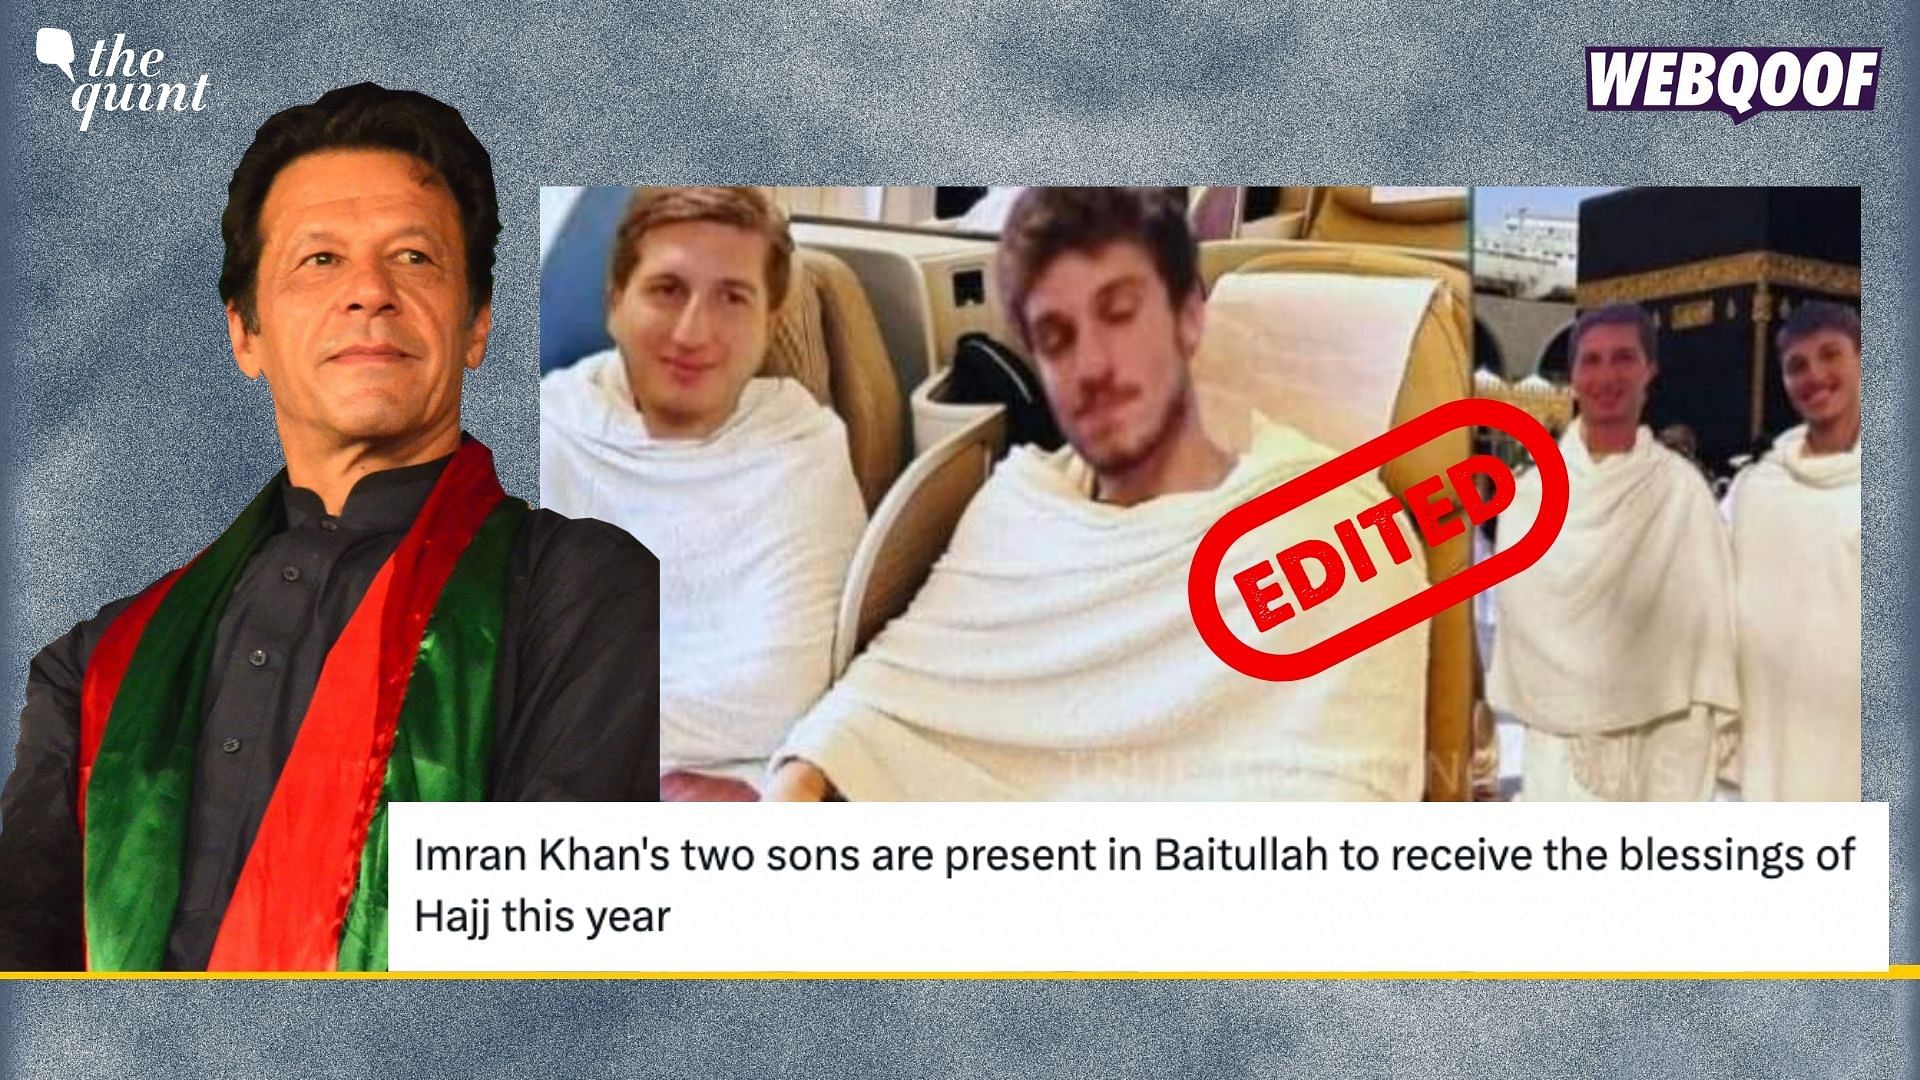 <div class="paragraphs"><p>Fact-Check: This image is edited and does not show Imran Khan's sons.</p></div>